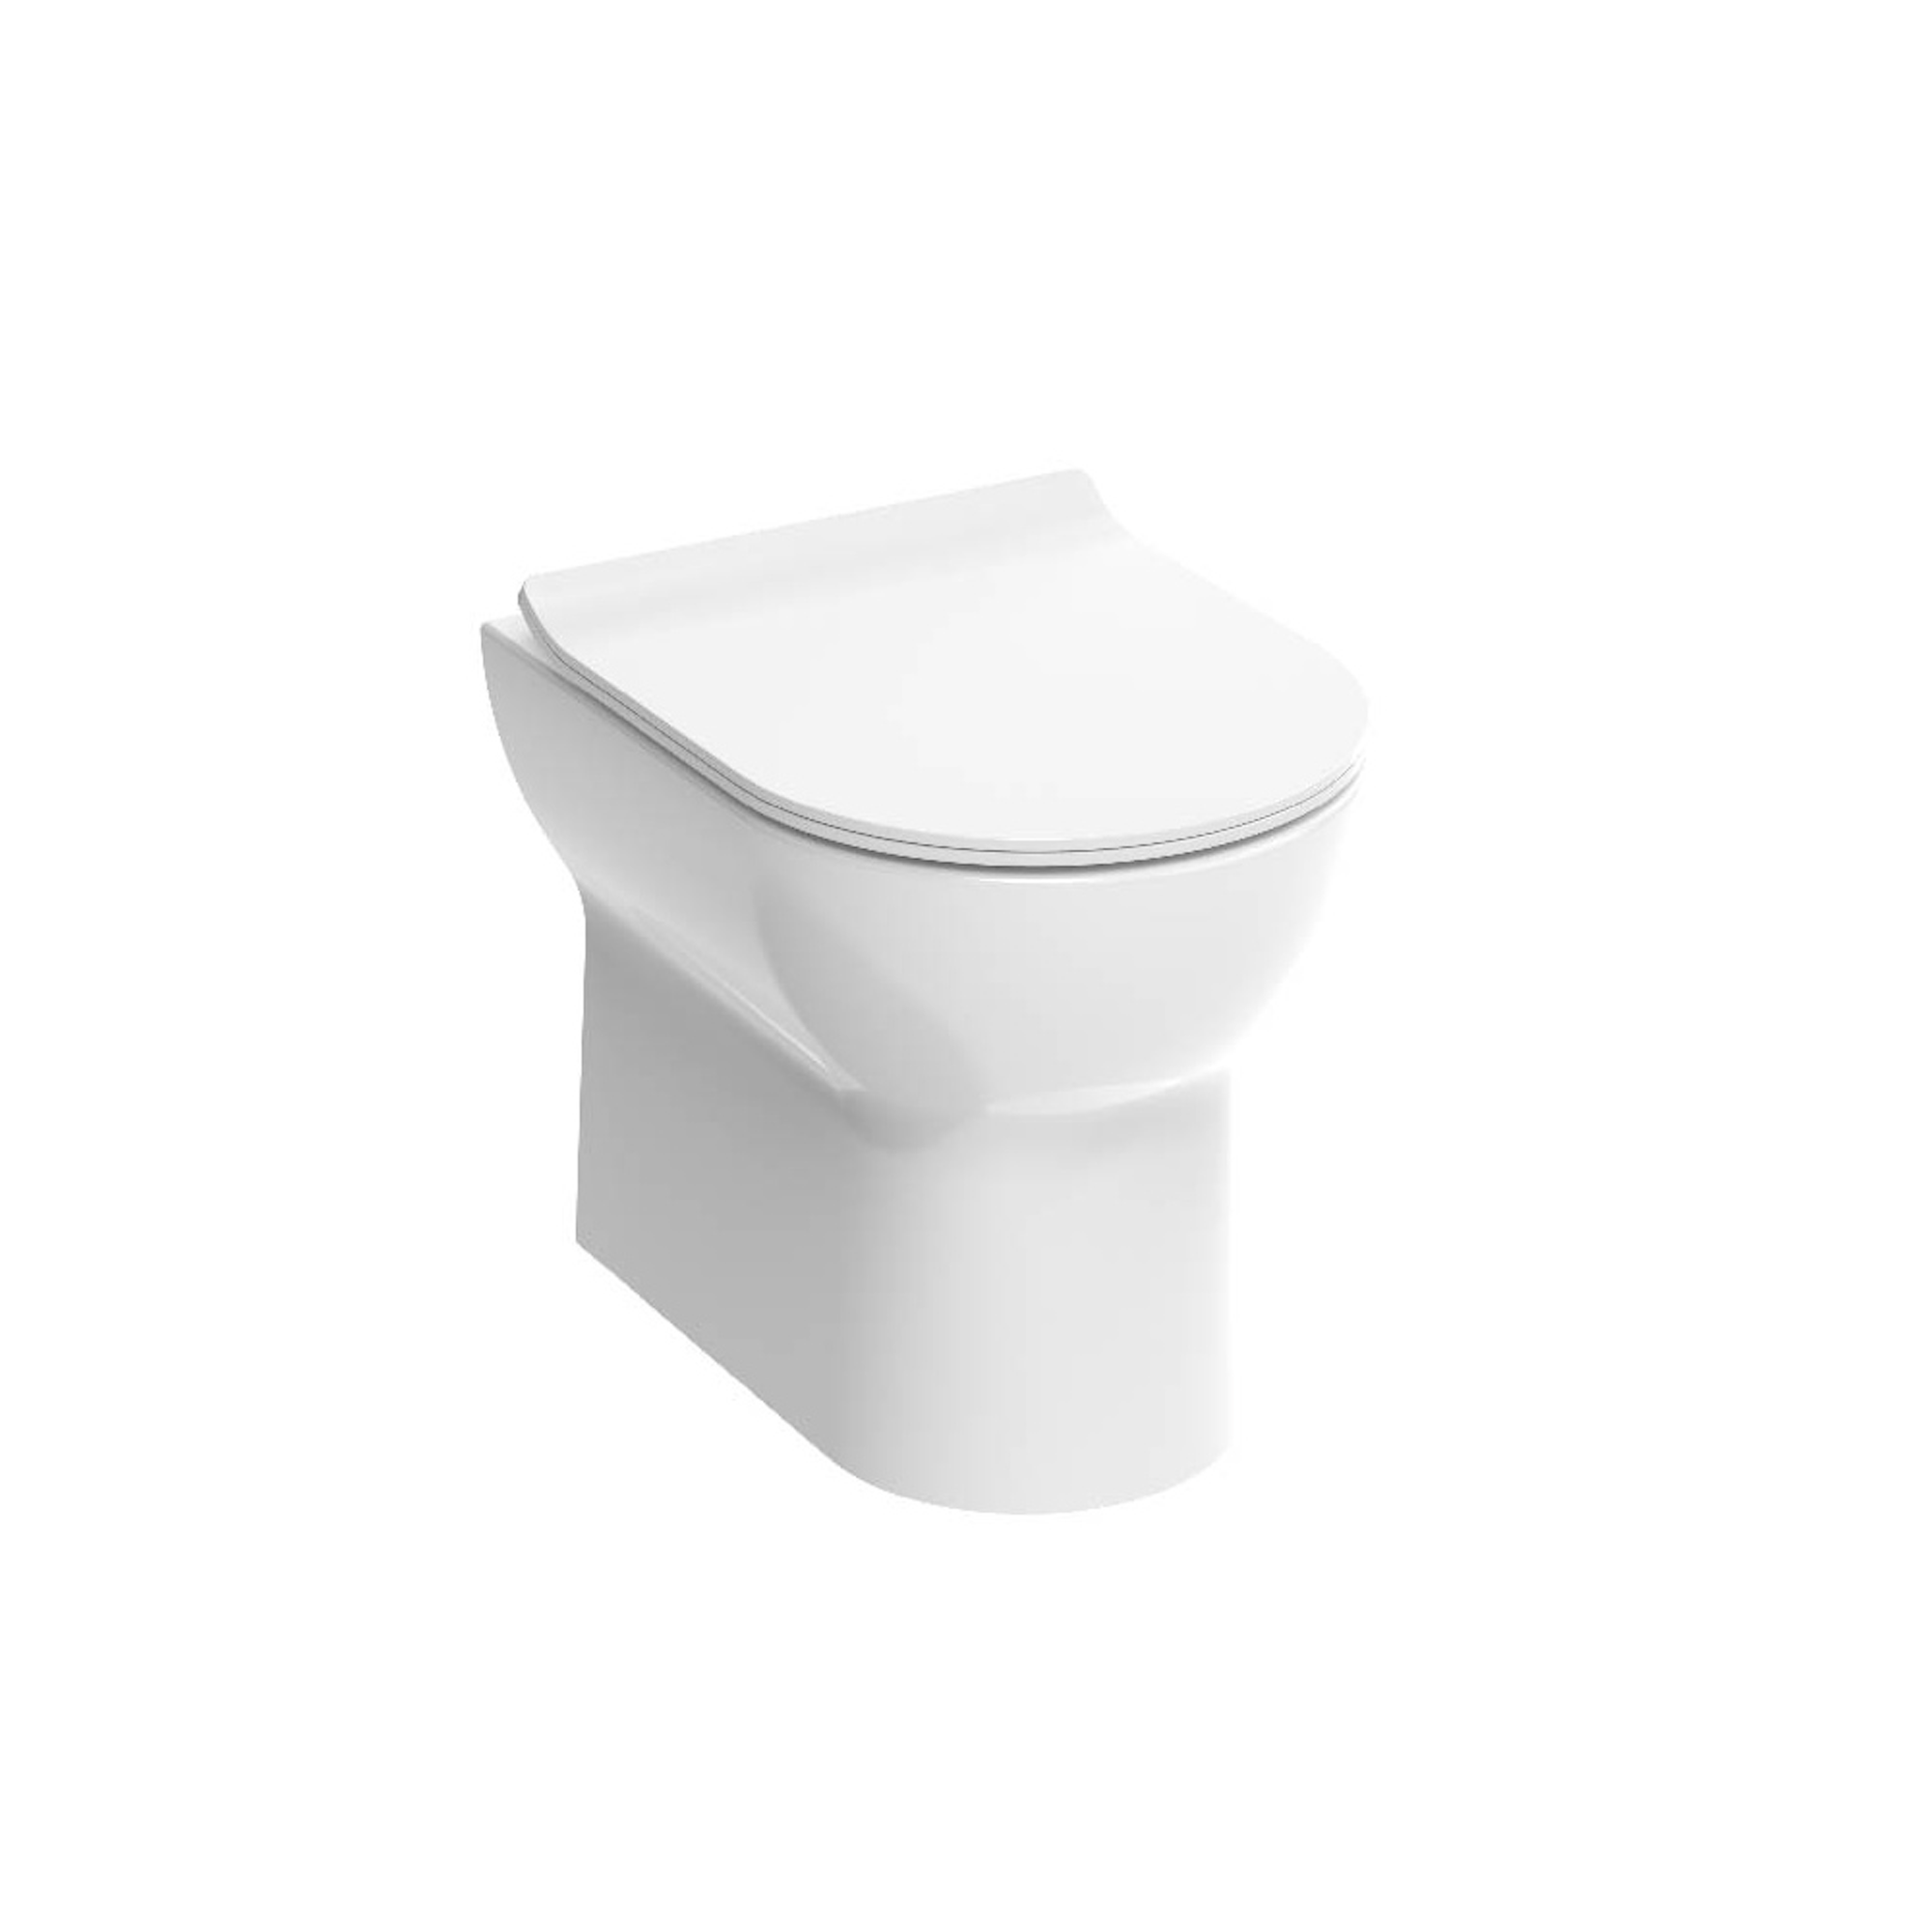 The Saneux AIR Back-to-Wall Toilet